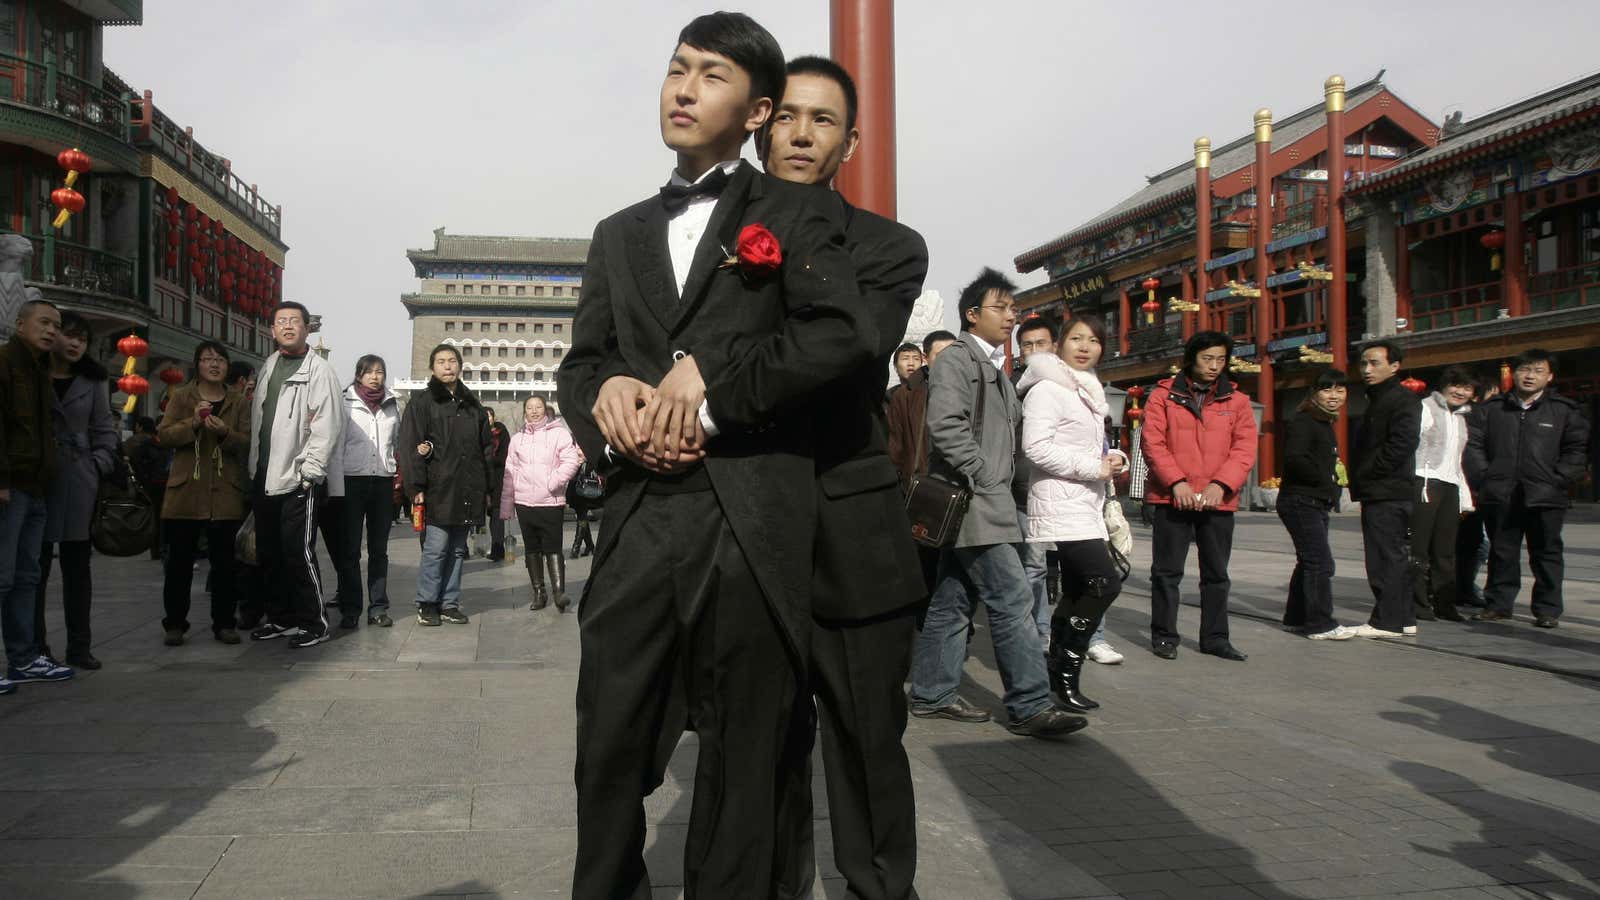 A Chinese gay couple at their symbolic “wedding” in 2009.